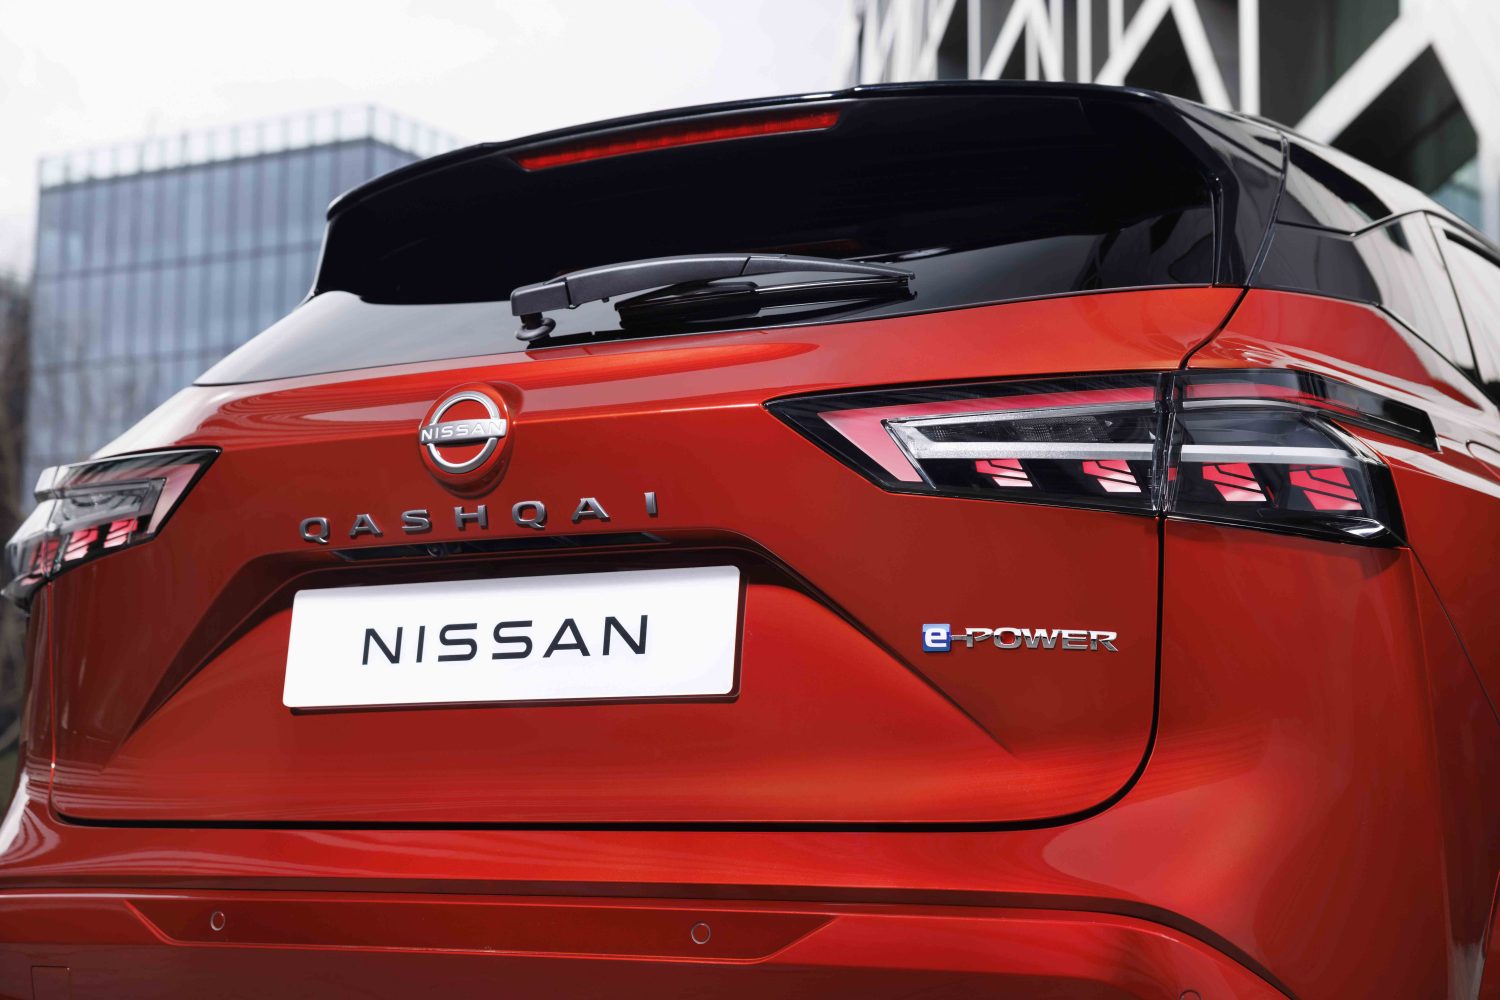 The face of Nuova Nissan